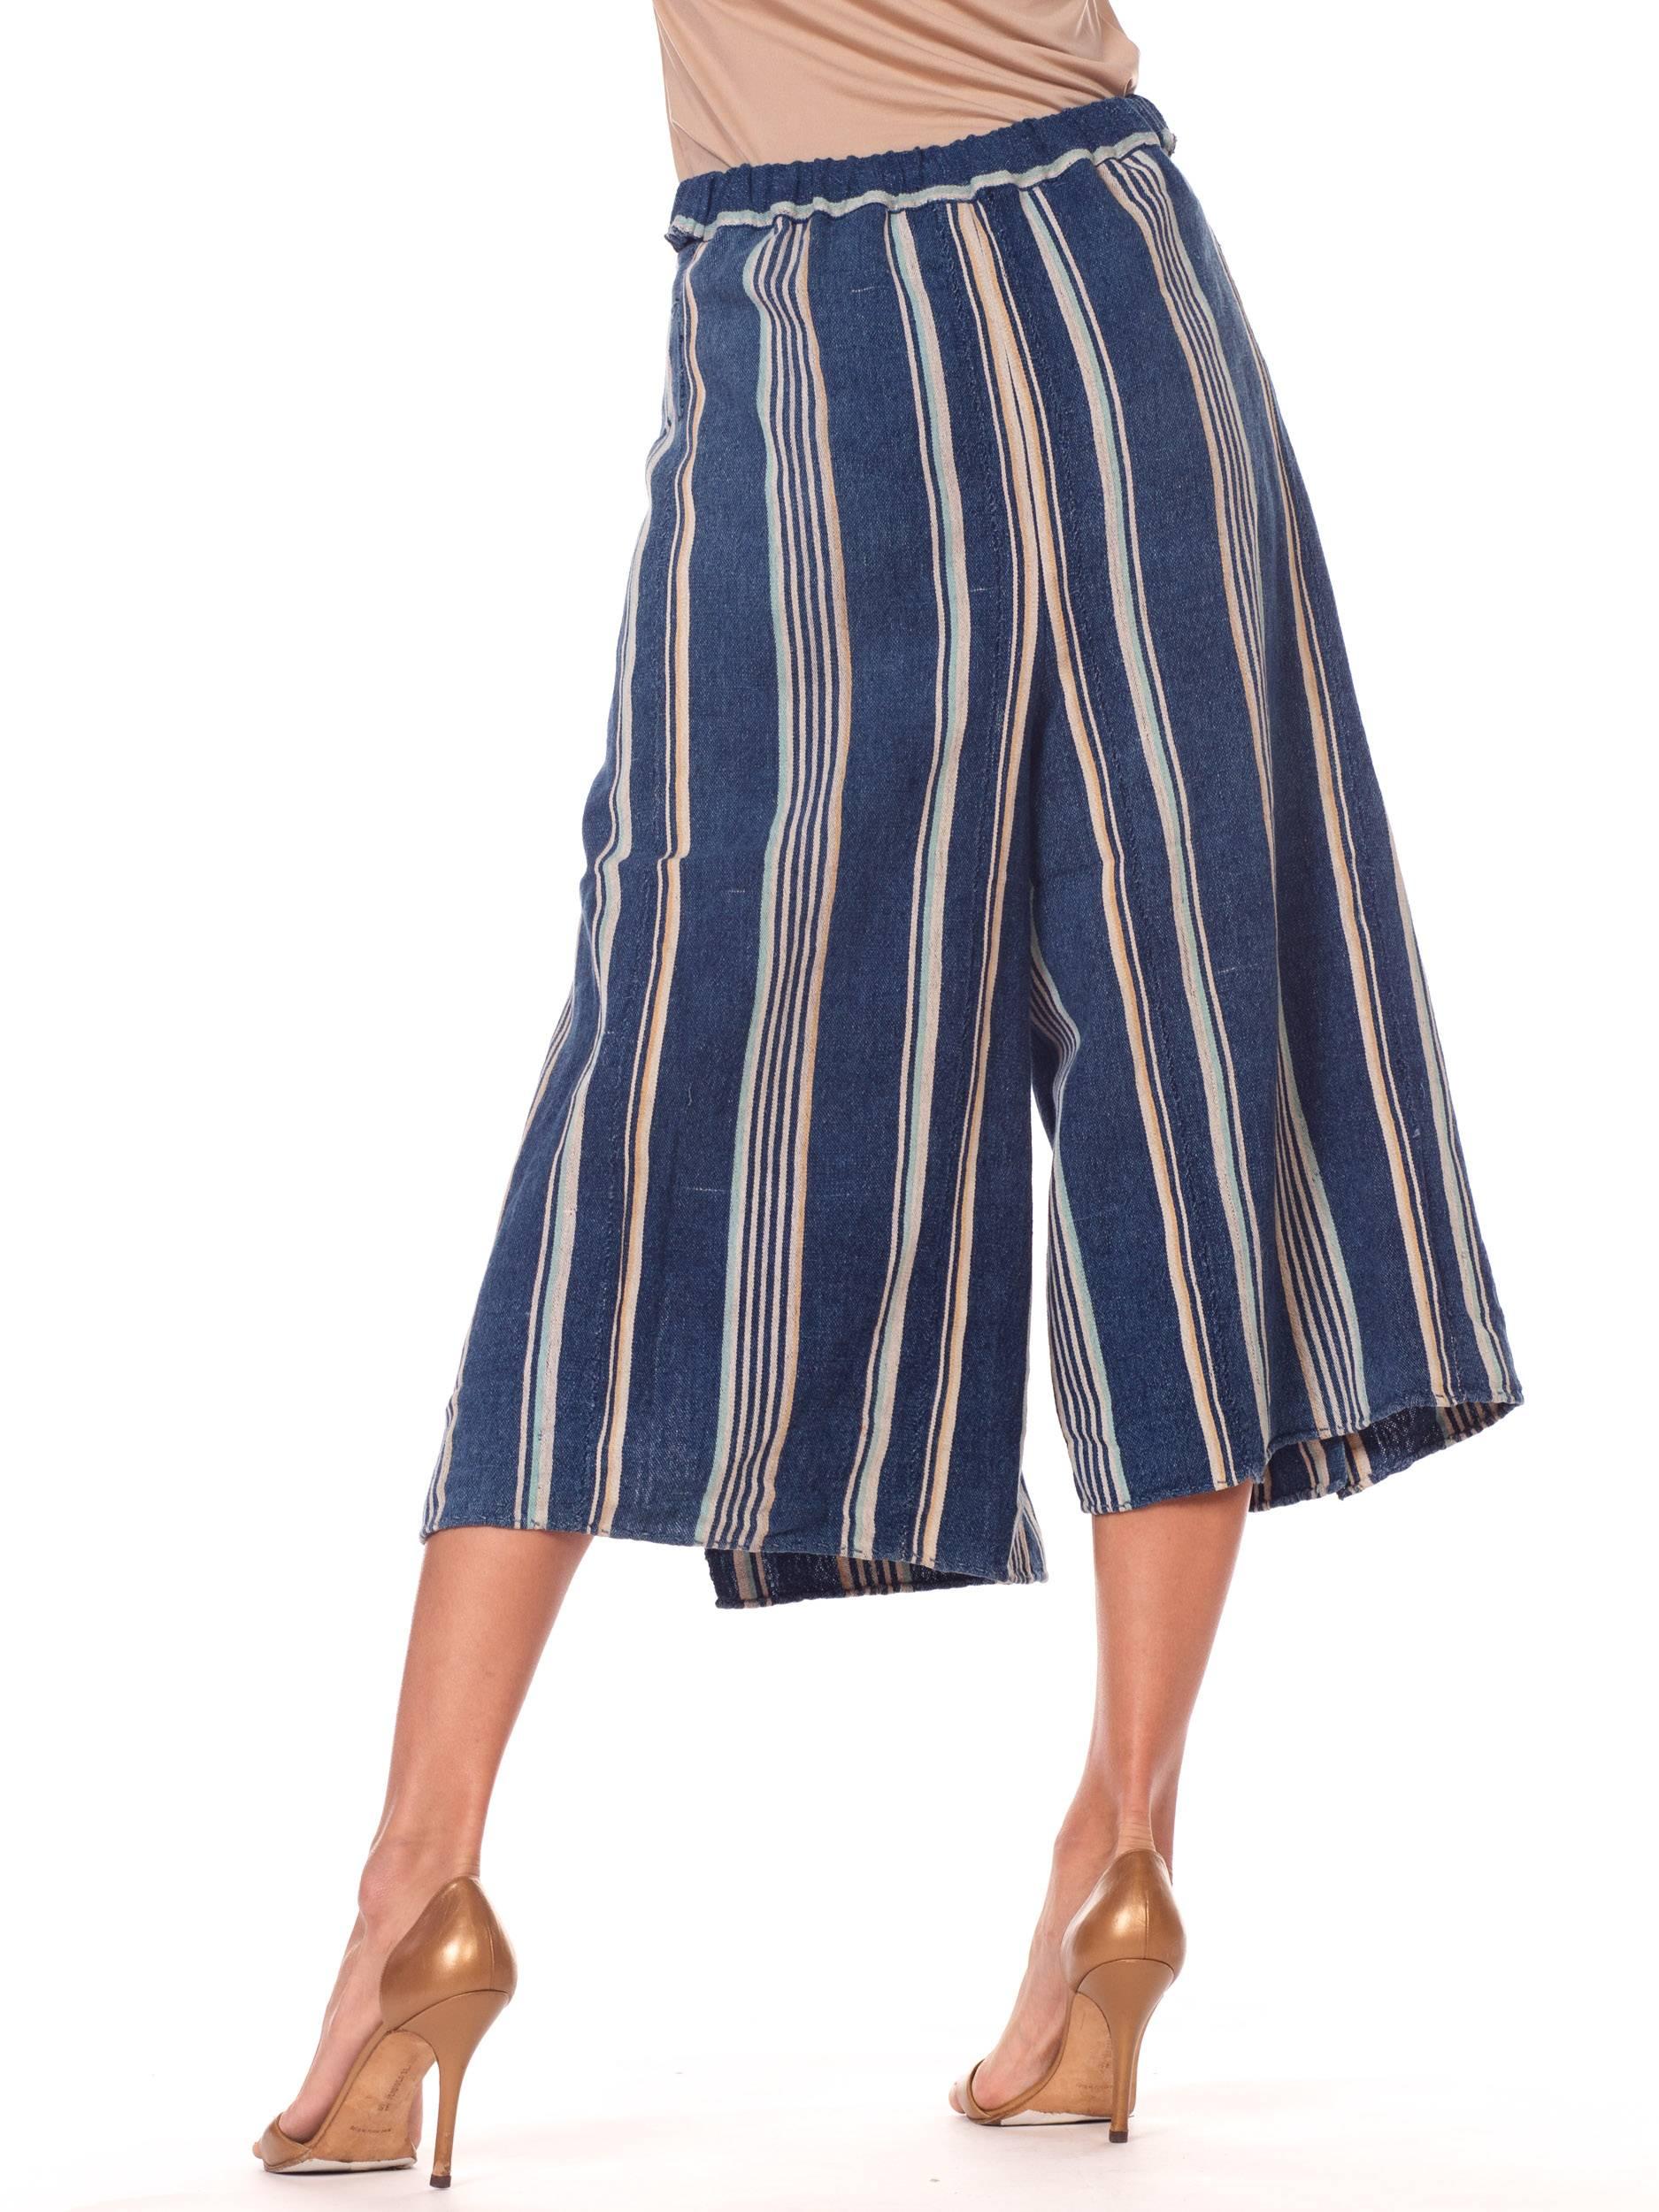 Women's or Men's Morphew Blue and White Striped Handwoven African Indigo Wrap Pants